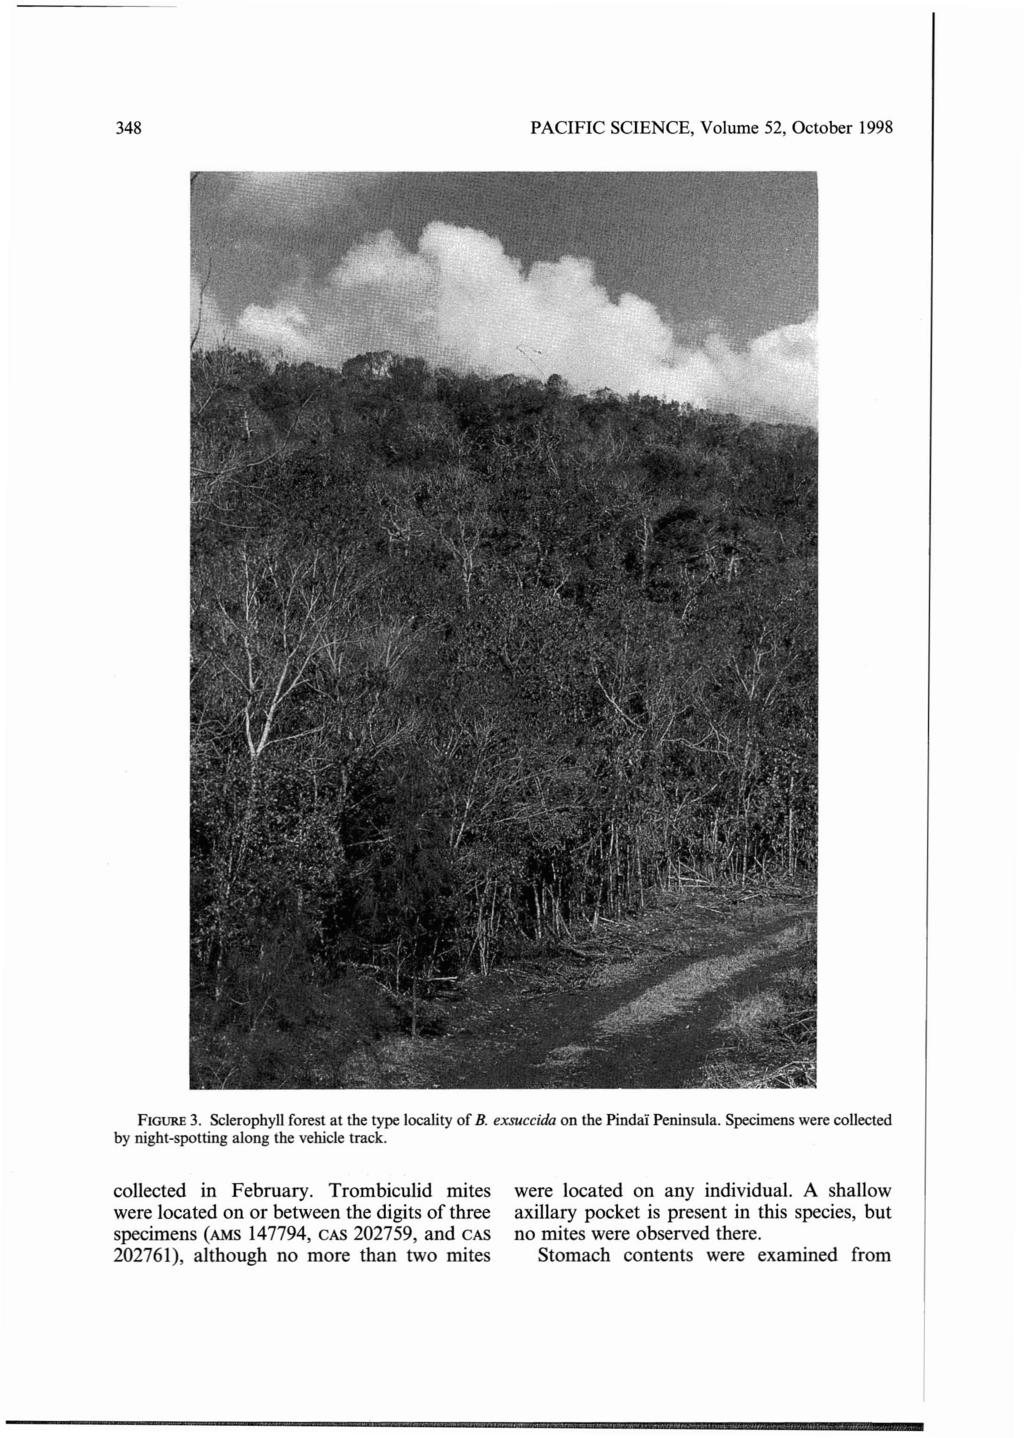 348 PACIFIC SCIENCE, Volume 52, October 1998 FIGURE 3. Sclerophyll forest at the type locality of B. exsuccida on the Pindai Peninsula.